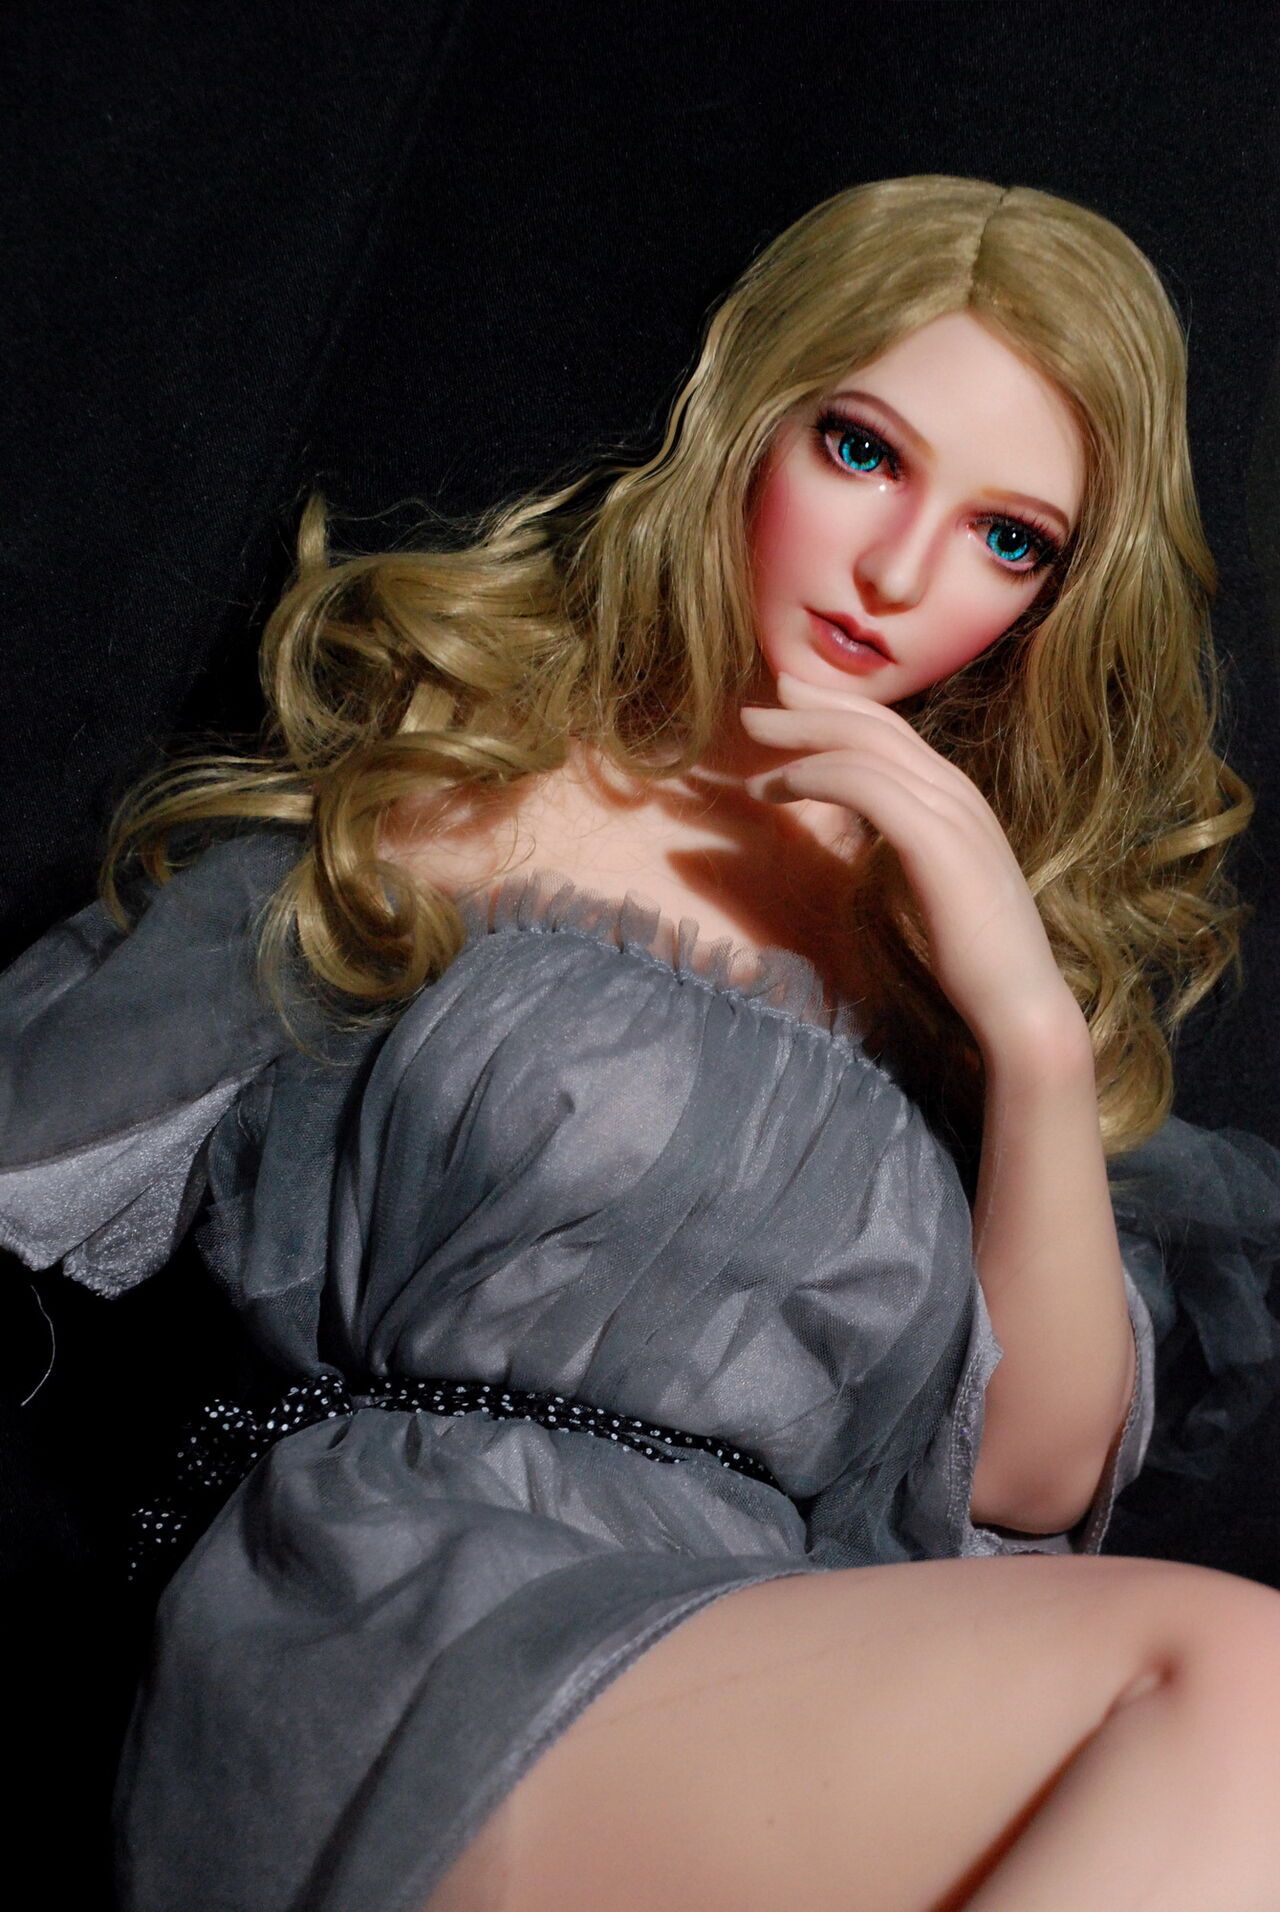 Elsa Babe - Warm 10% off, the overflowing gifts, and more! 2022.05.09 15